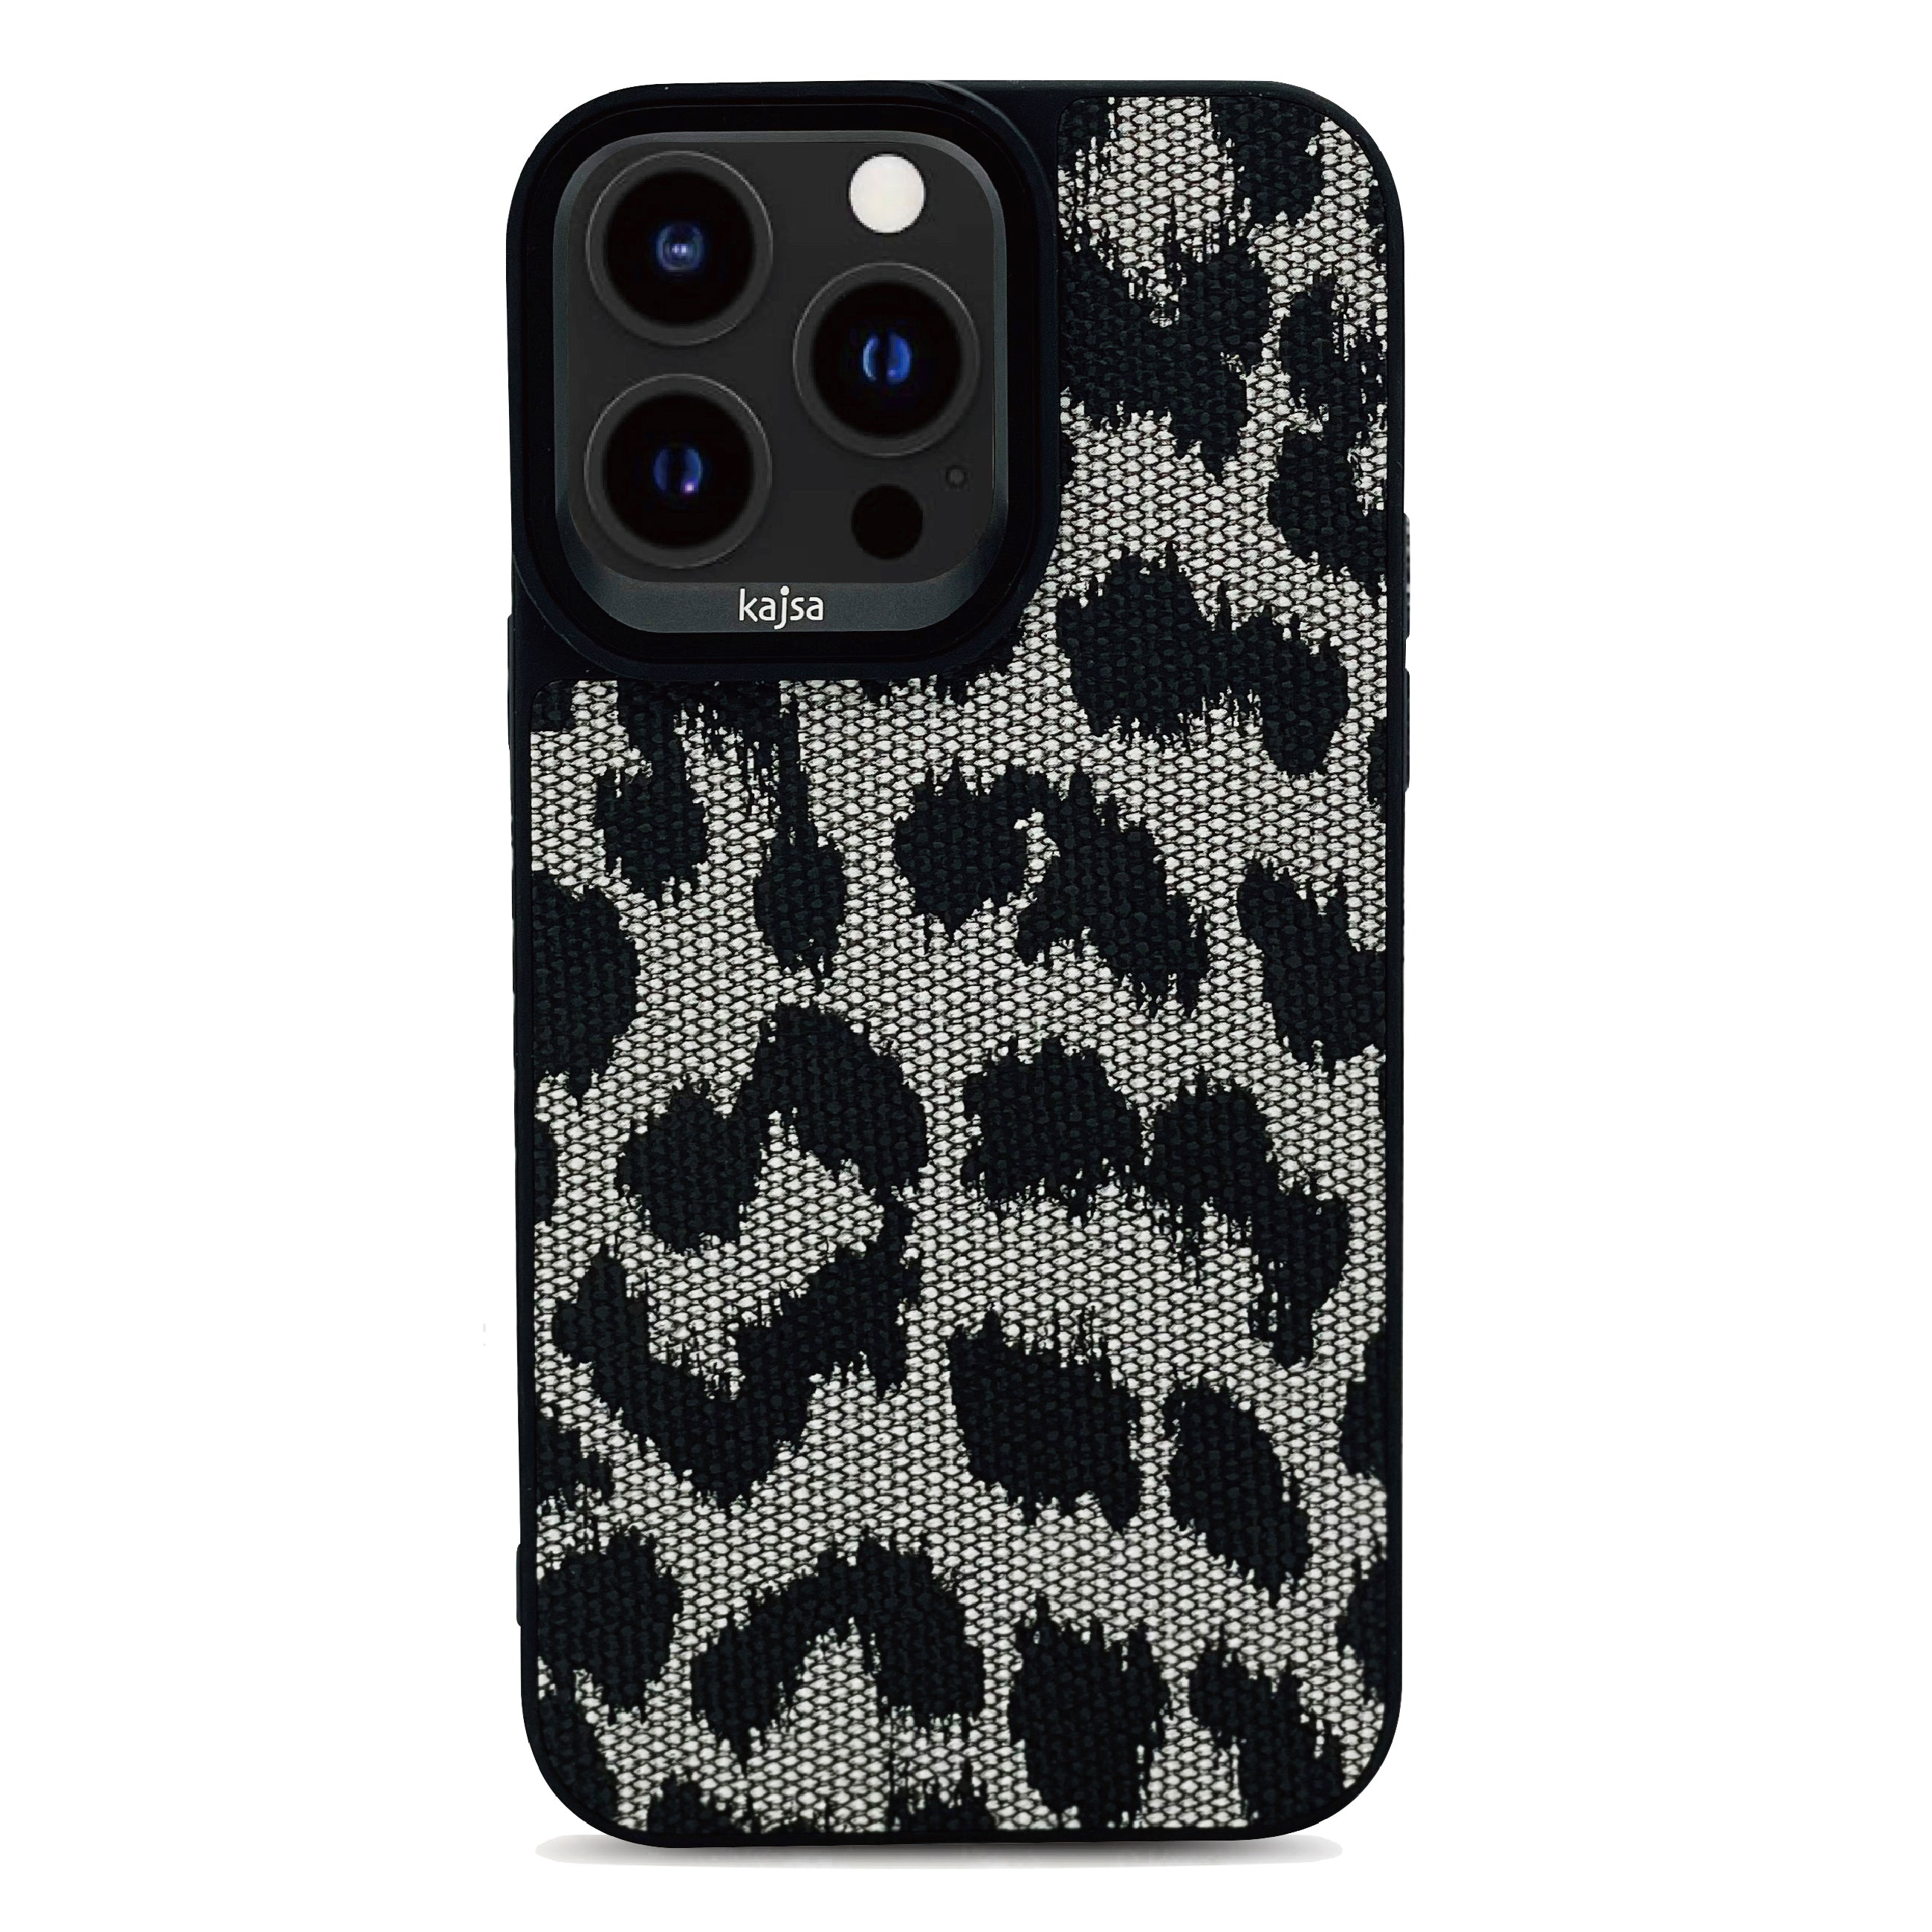 Glamorous Collection - Wild III Back Case for iPhone 14-Phone Case- phone case - phone cases- phone cover- iphone cover- iphone case- iphone cases- leather case- leather cases- DIYCASE - custom case - leather cover - hand strap case - croco pattern case - snake pattern case - carbon fiber phone case - phone case brand - unique phone case - high quality - phone case brand - protective case - buy phone case hong kong - online buy phone case - iphone‎手機殼 - 客製化手機殼 - samsung ‎手機殼 - 香港手機殼 - 買電話殼